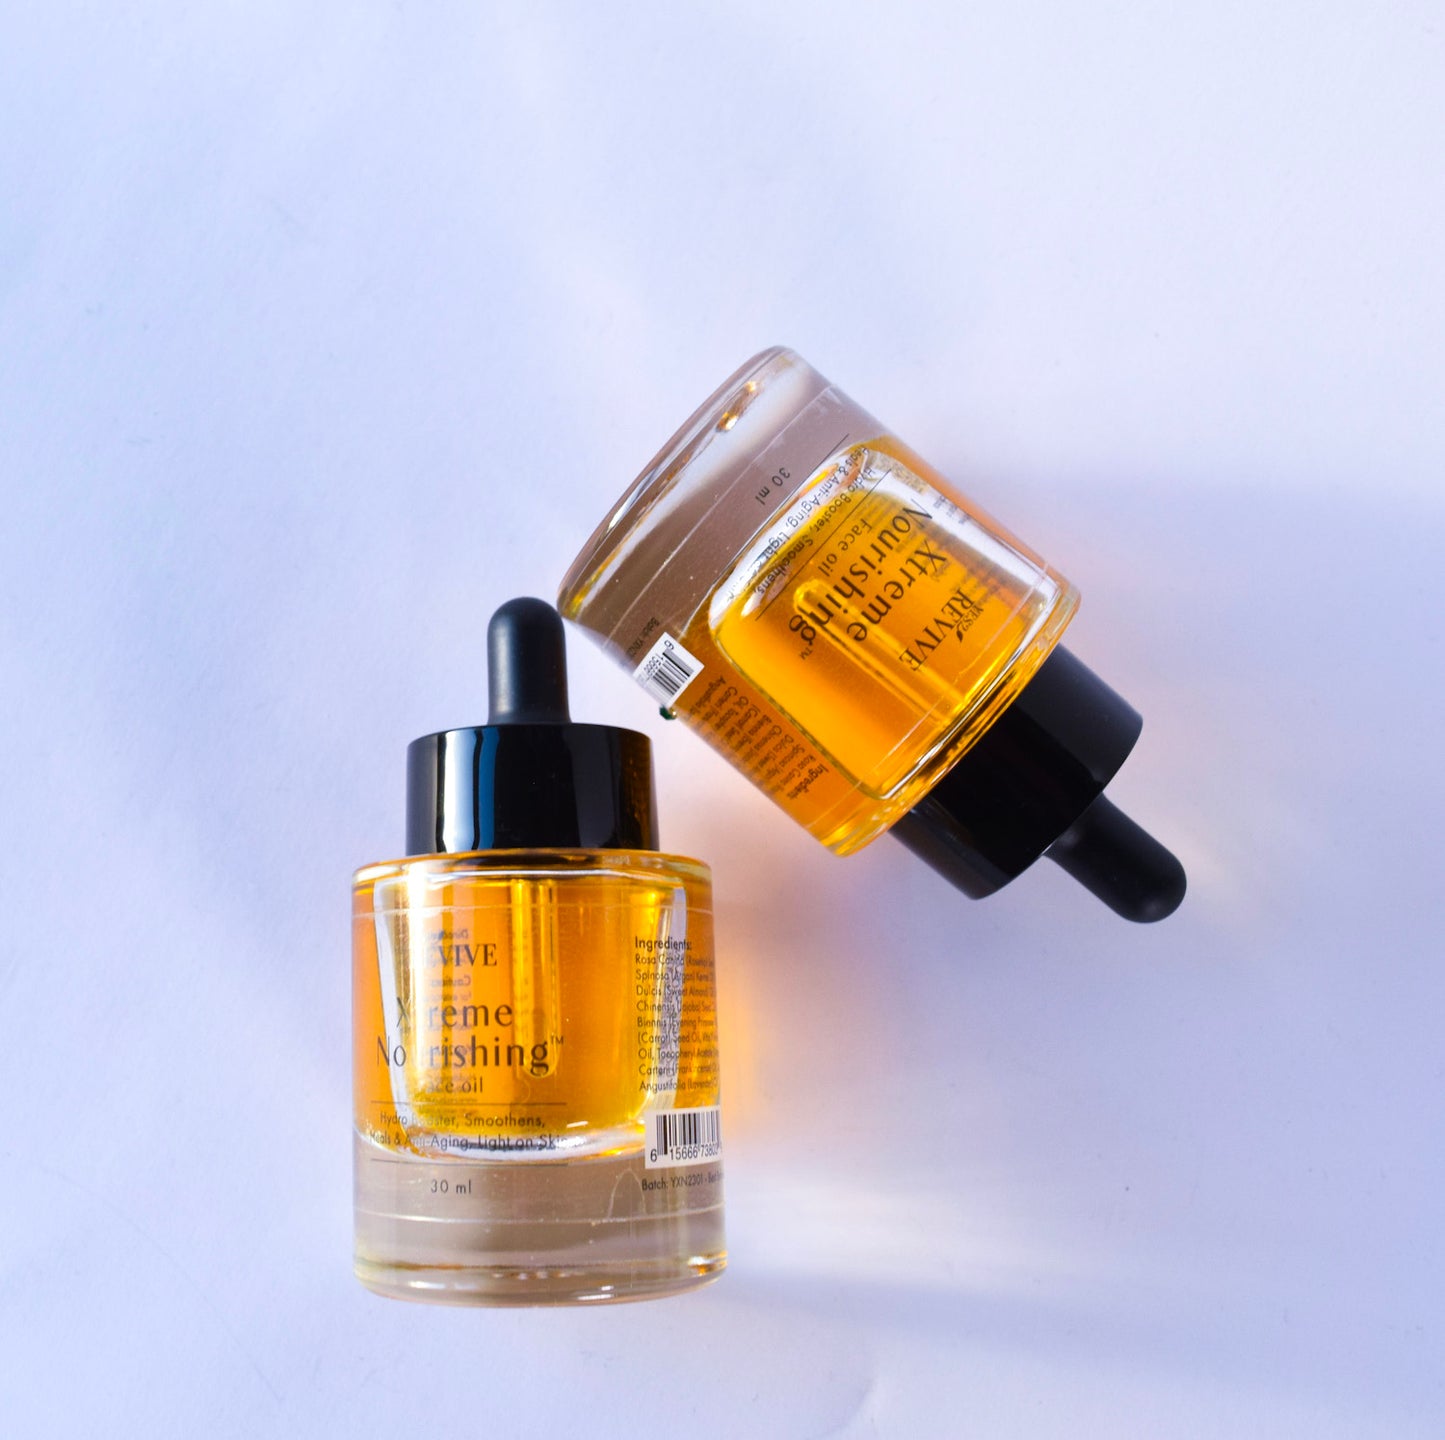 Xtreme Nourishing Face Oil with Vitamin E for Skin